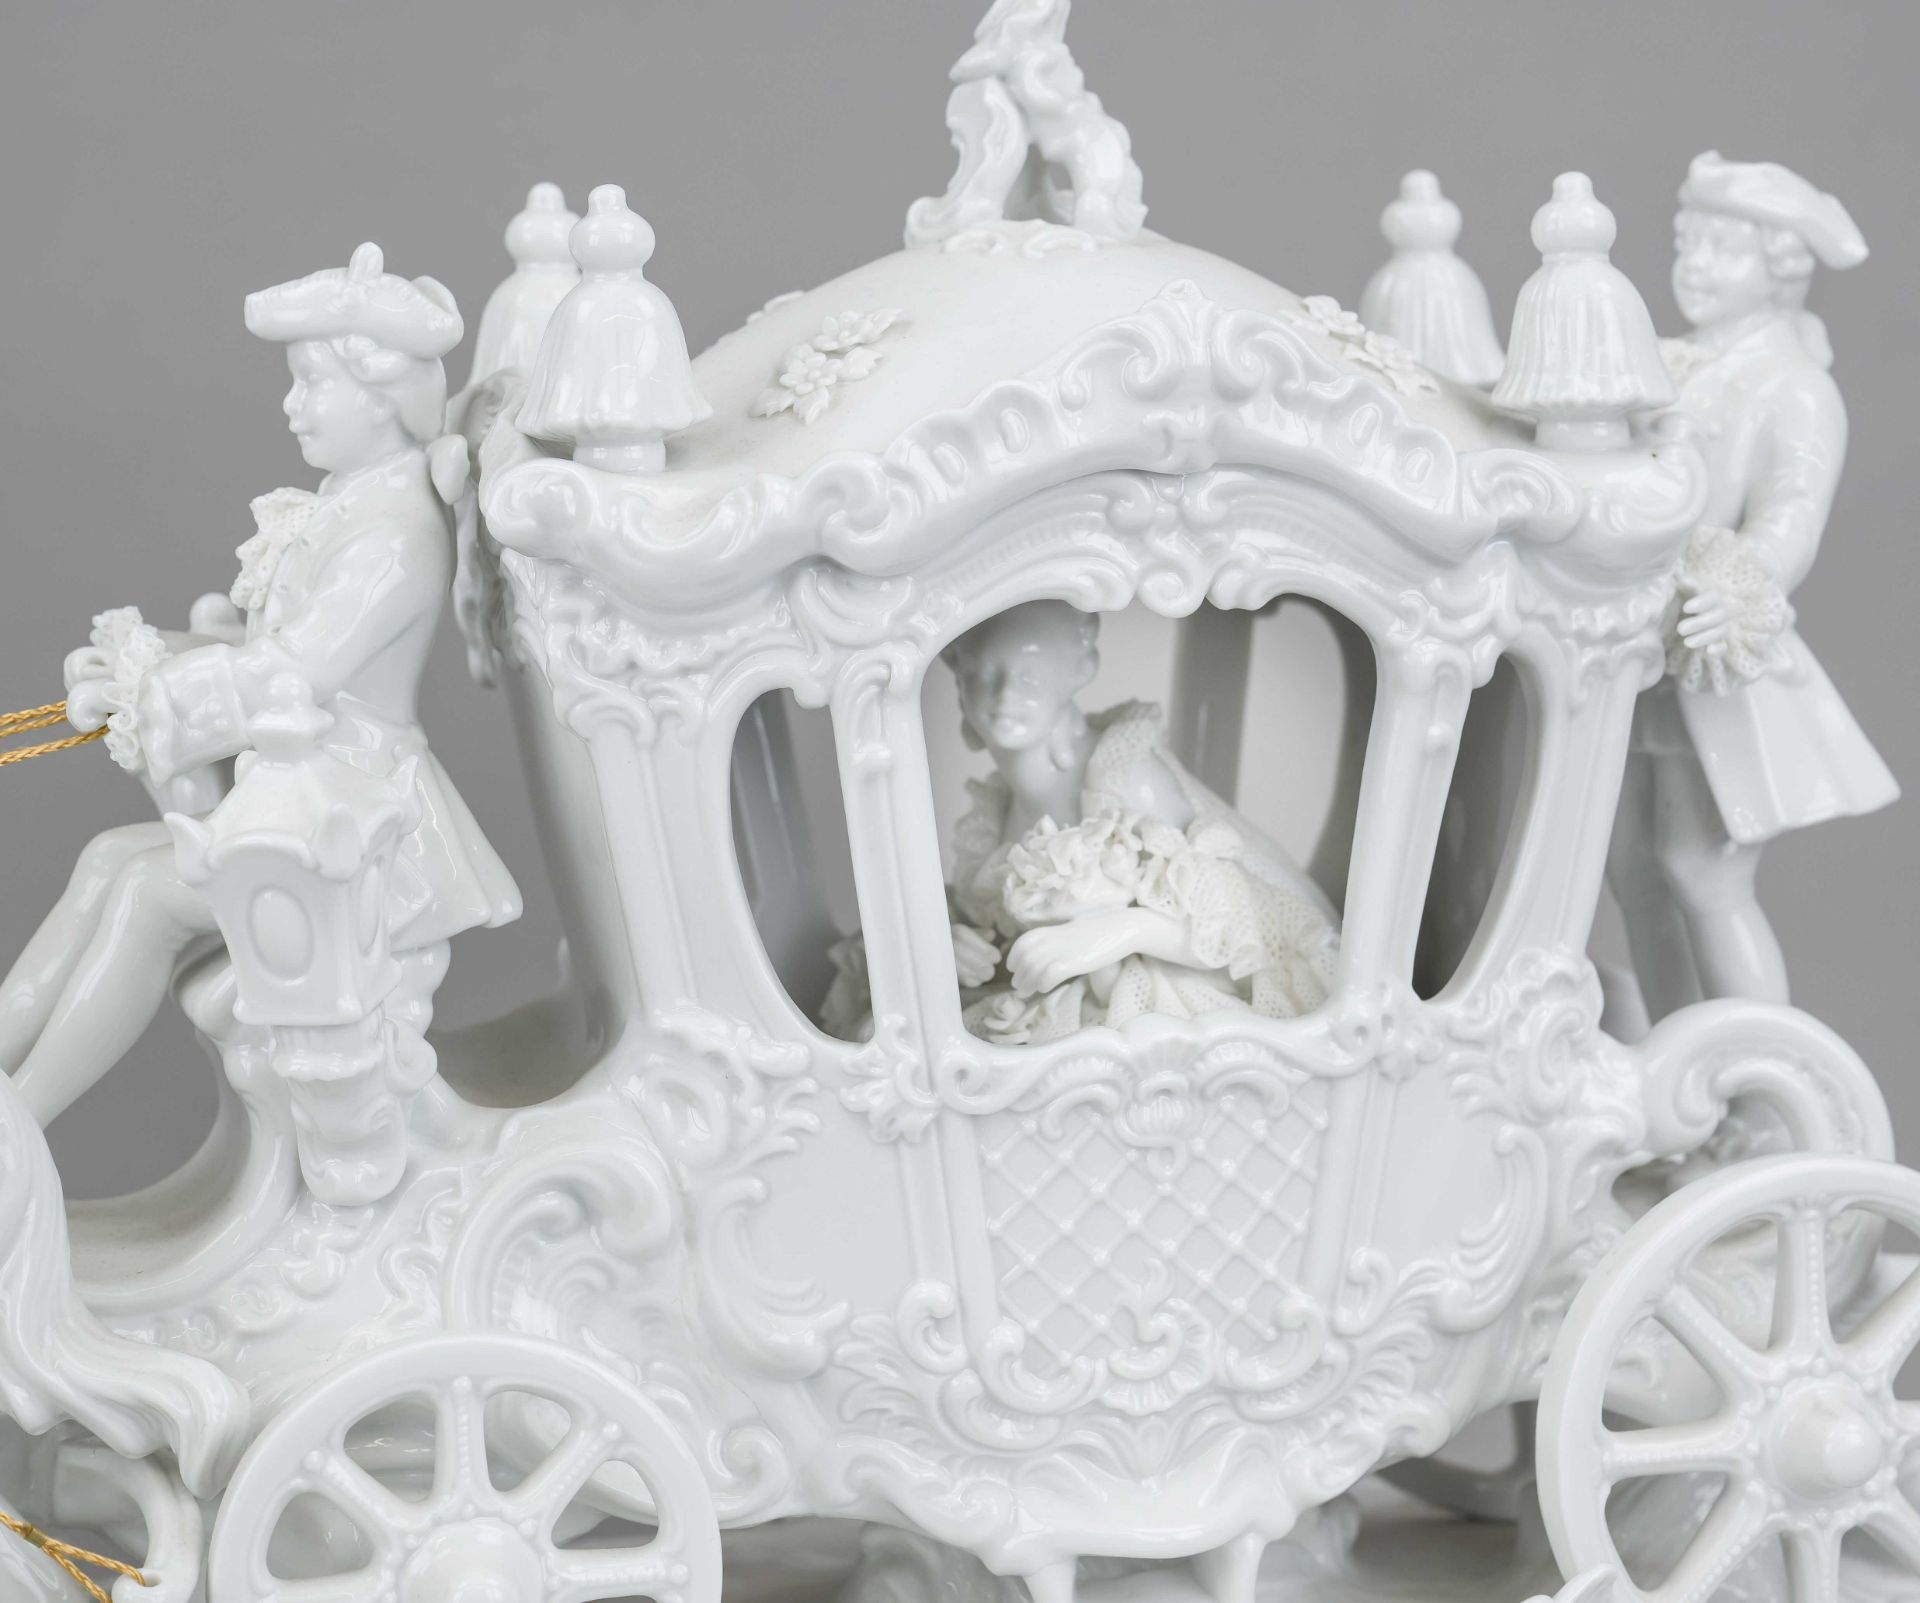 Imposing rococo carriage, Unterweißbach, Thuringia, mark after 1990, 3rd choice, white, designed - Image 2 of 2